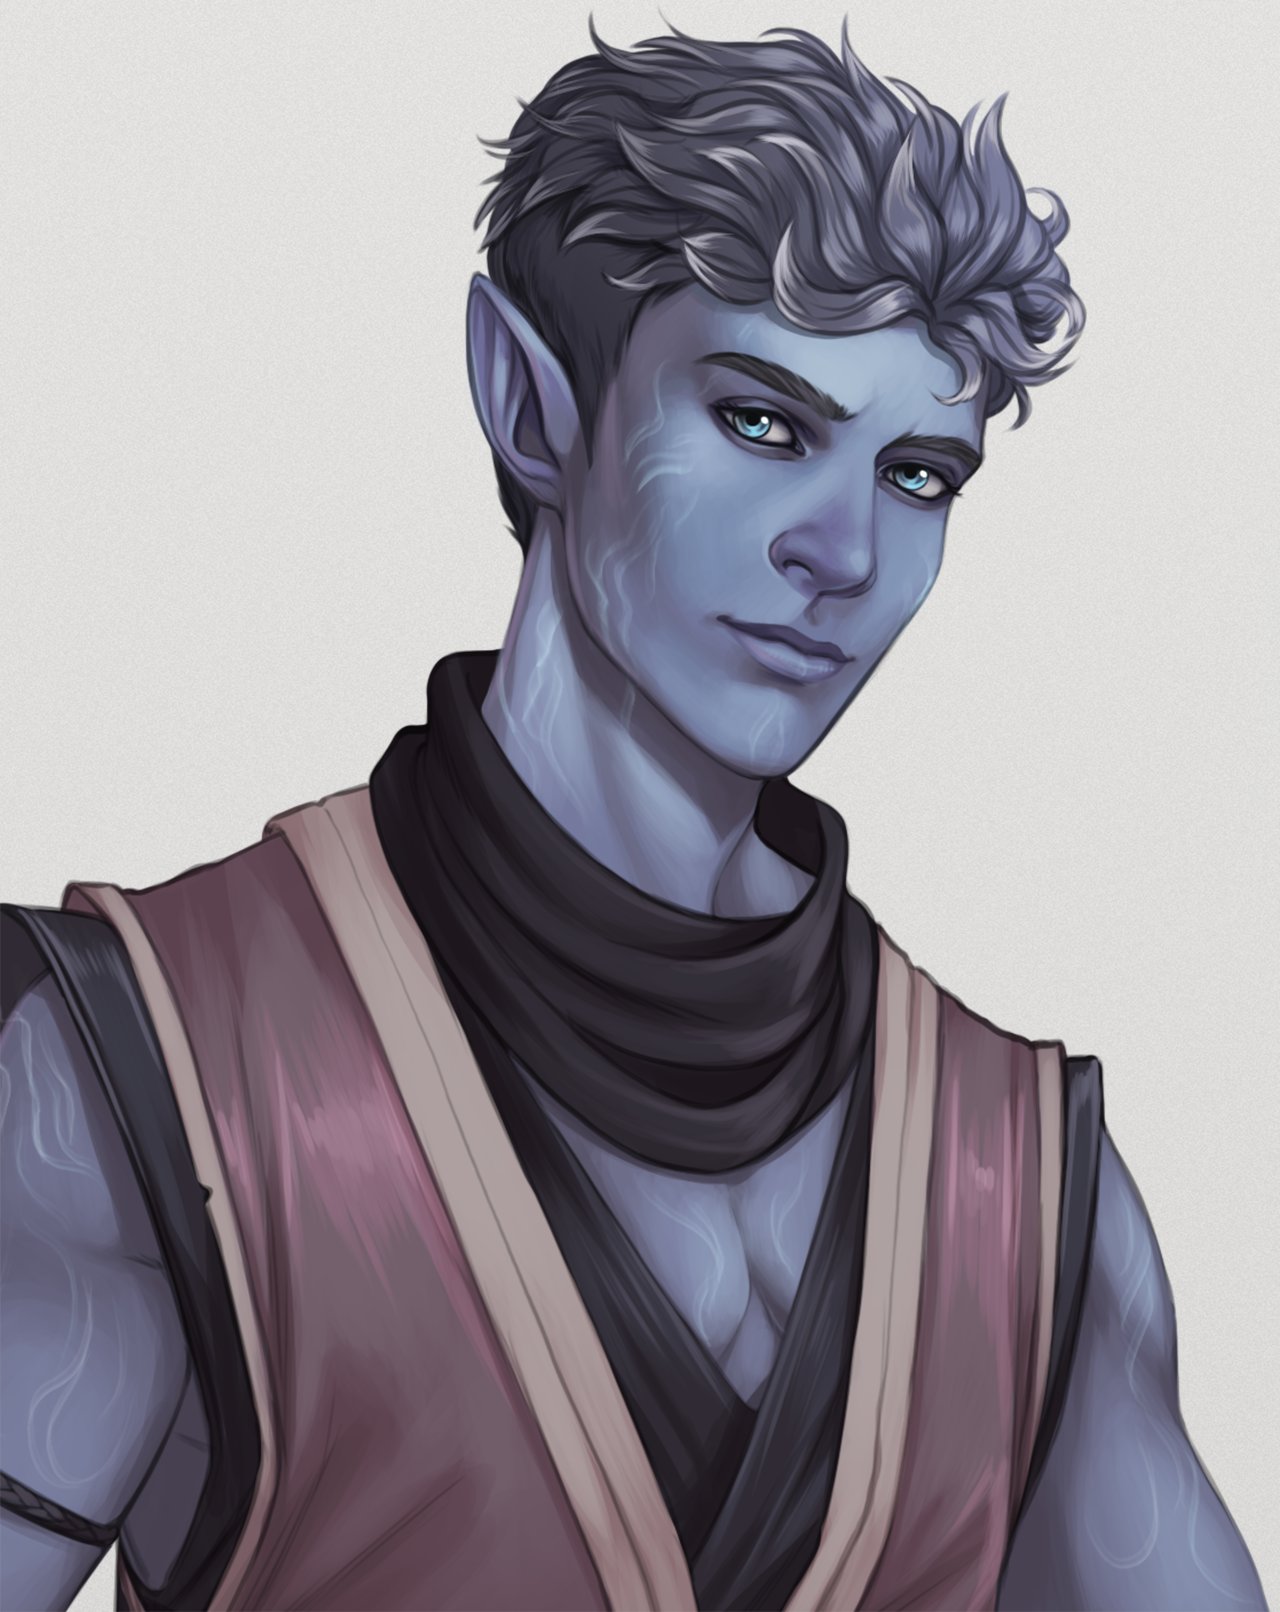 “An Air Genasi shadow monk for a Patreon commissioner! 